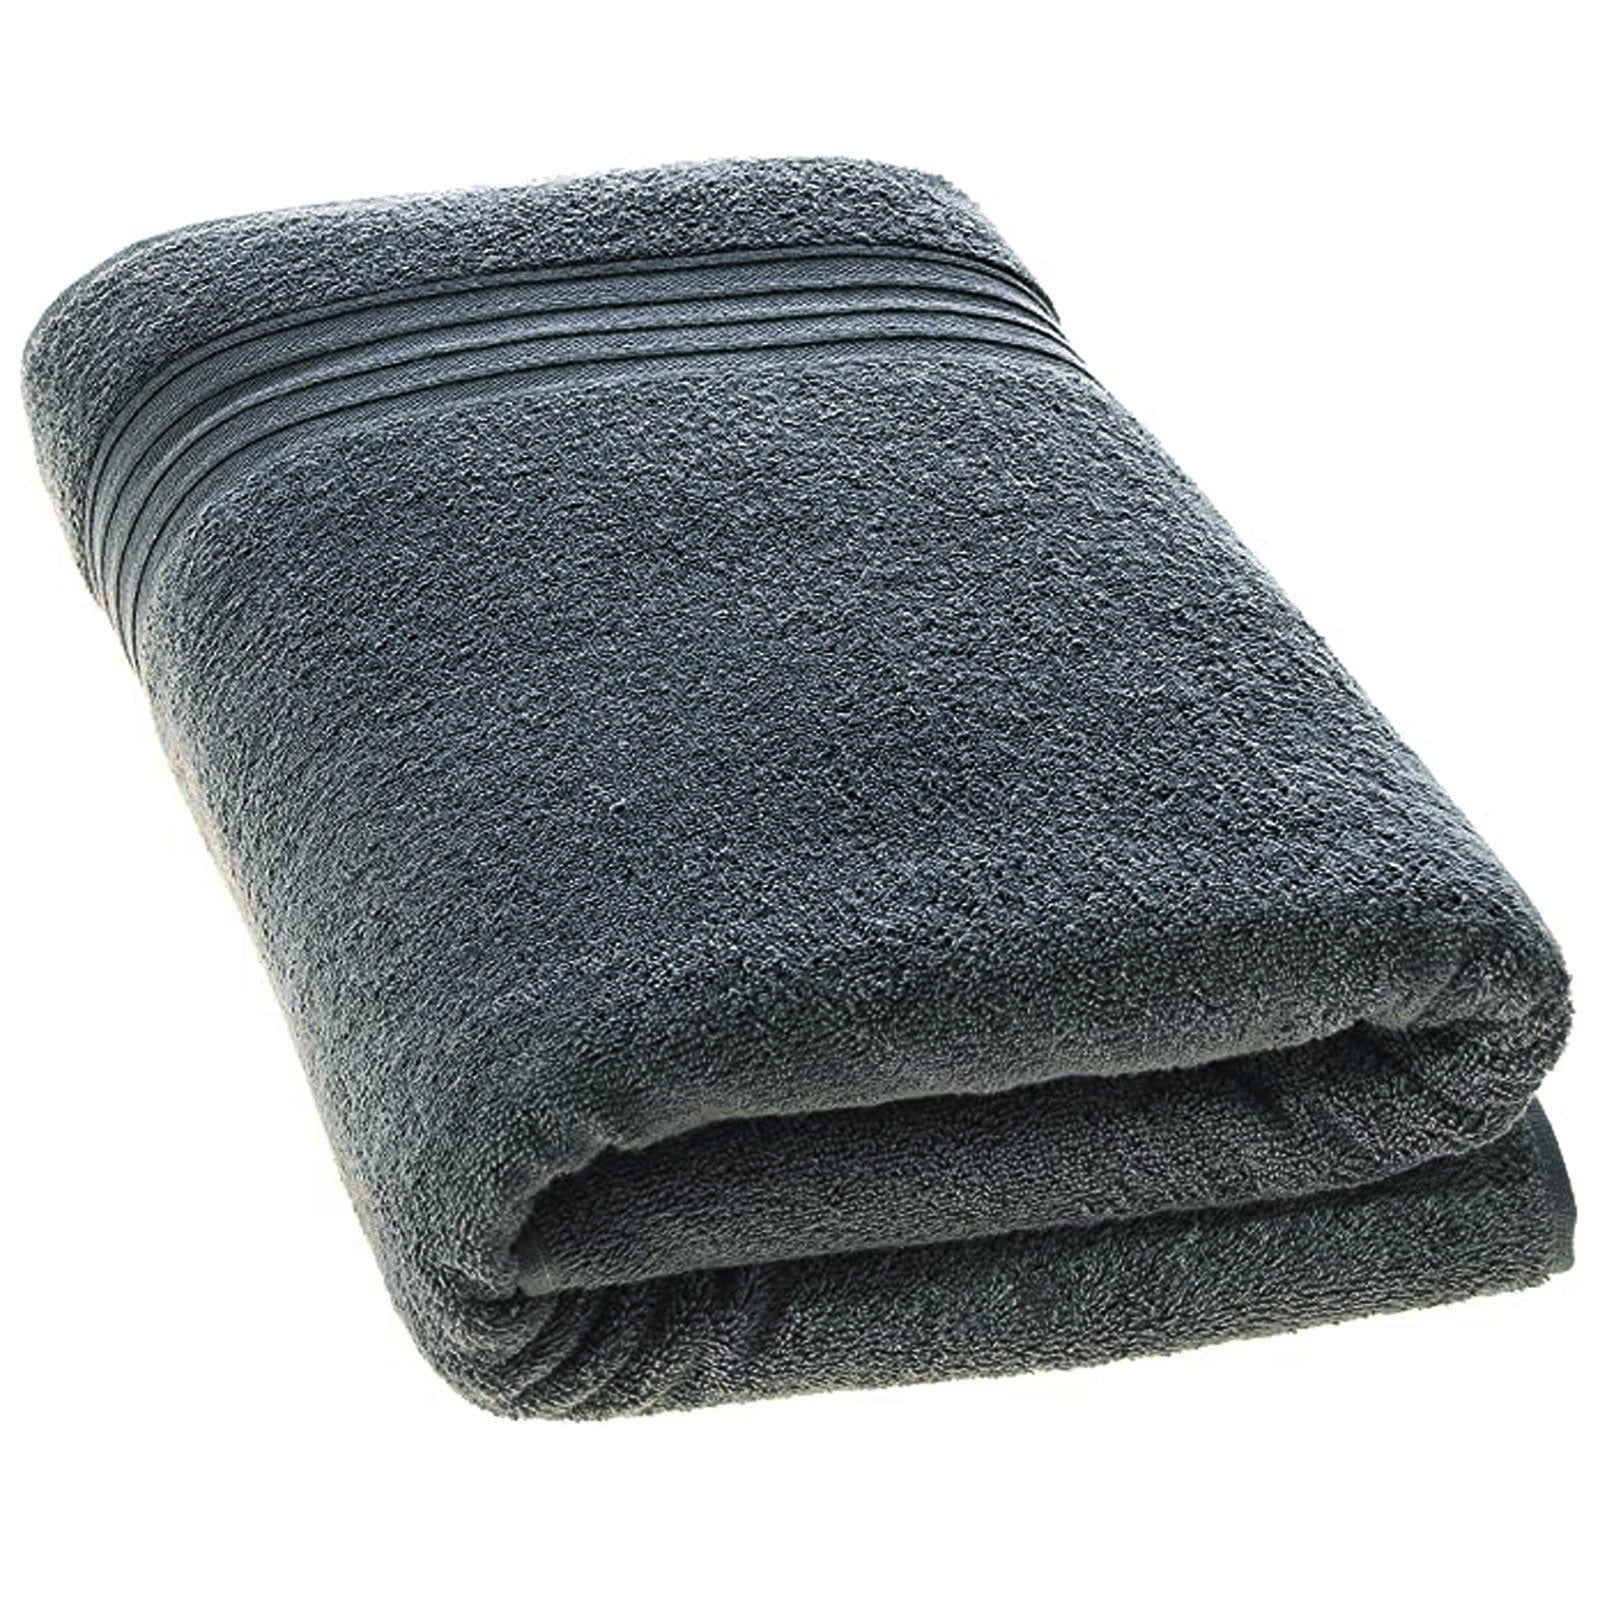 Extra Large Bath Sheet Towel Soft Absorbent Cotton 35 x 70 Inches Utopia Towels 